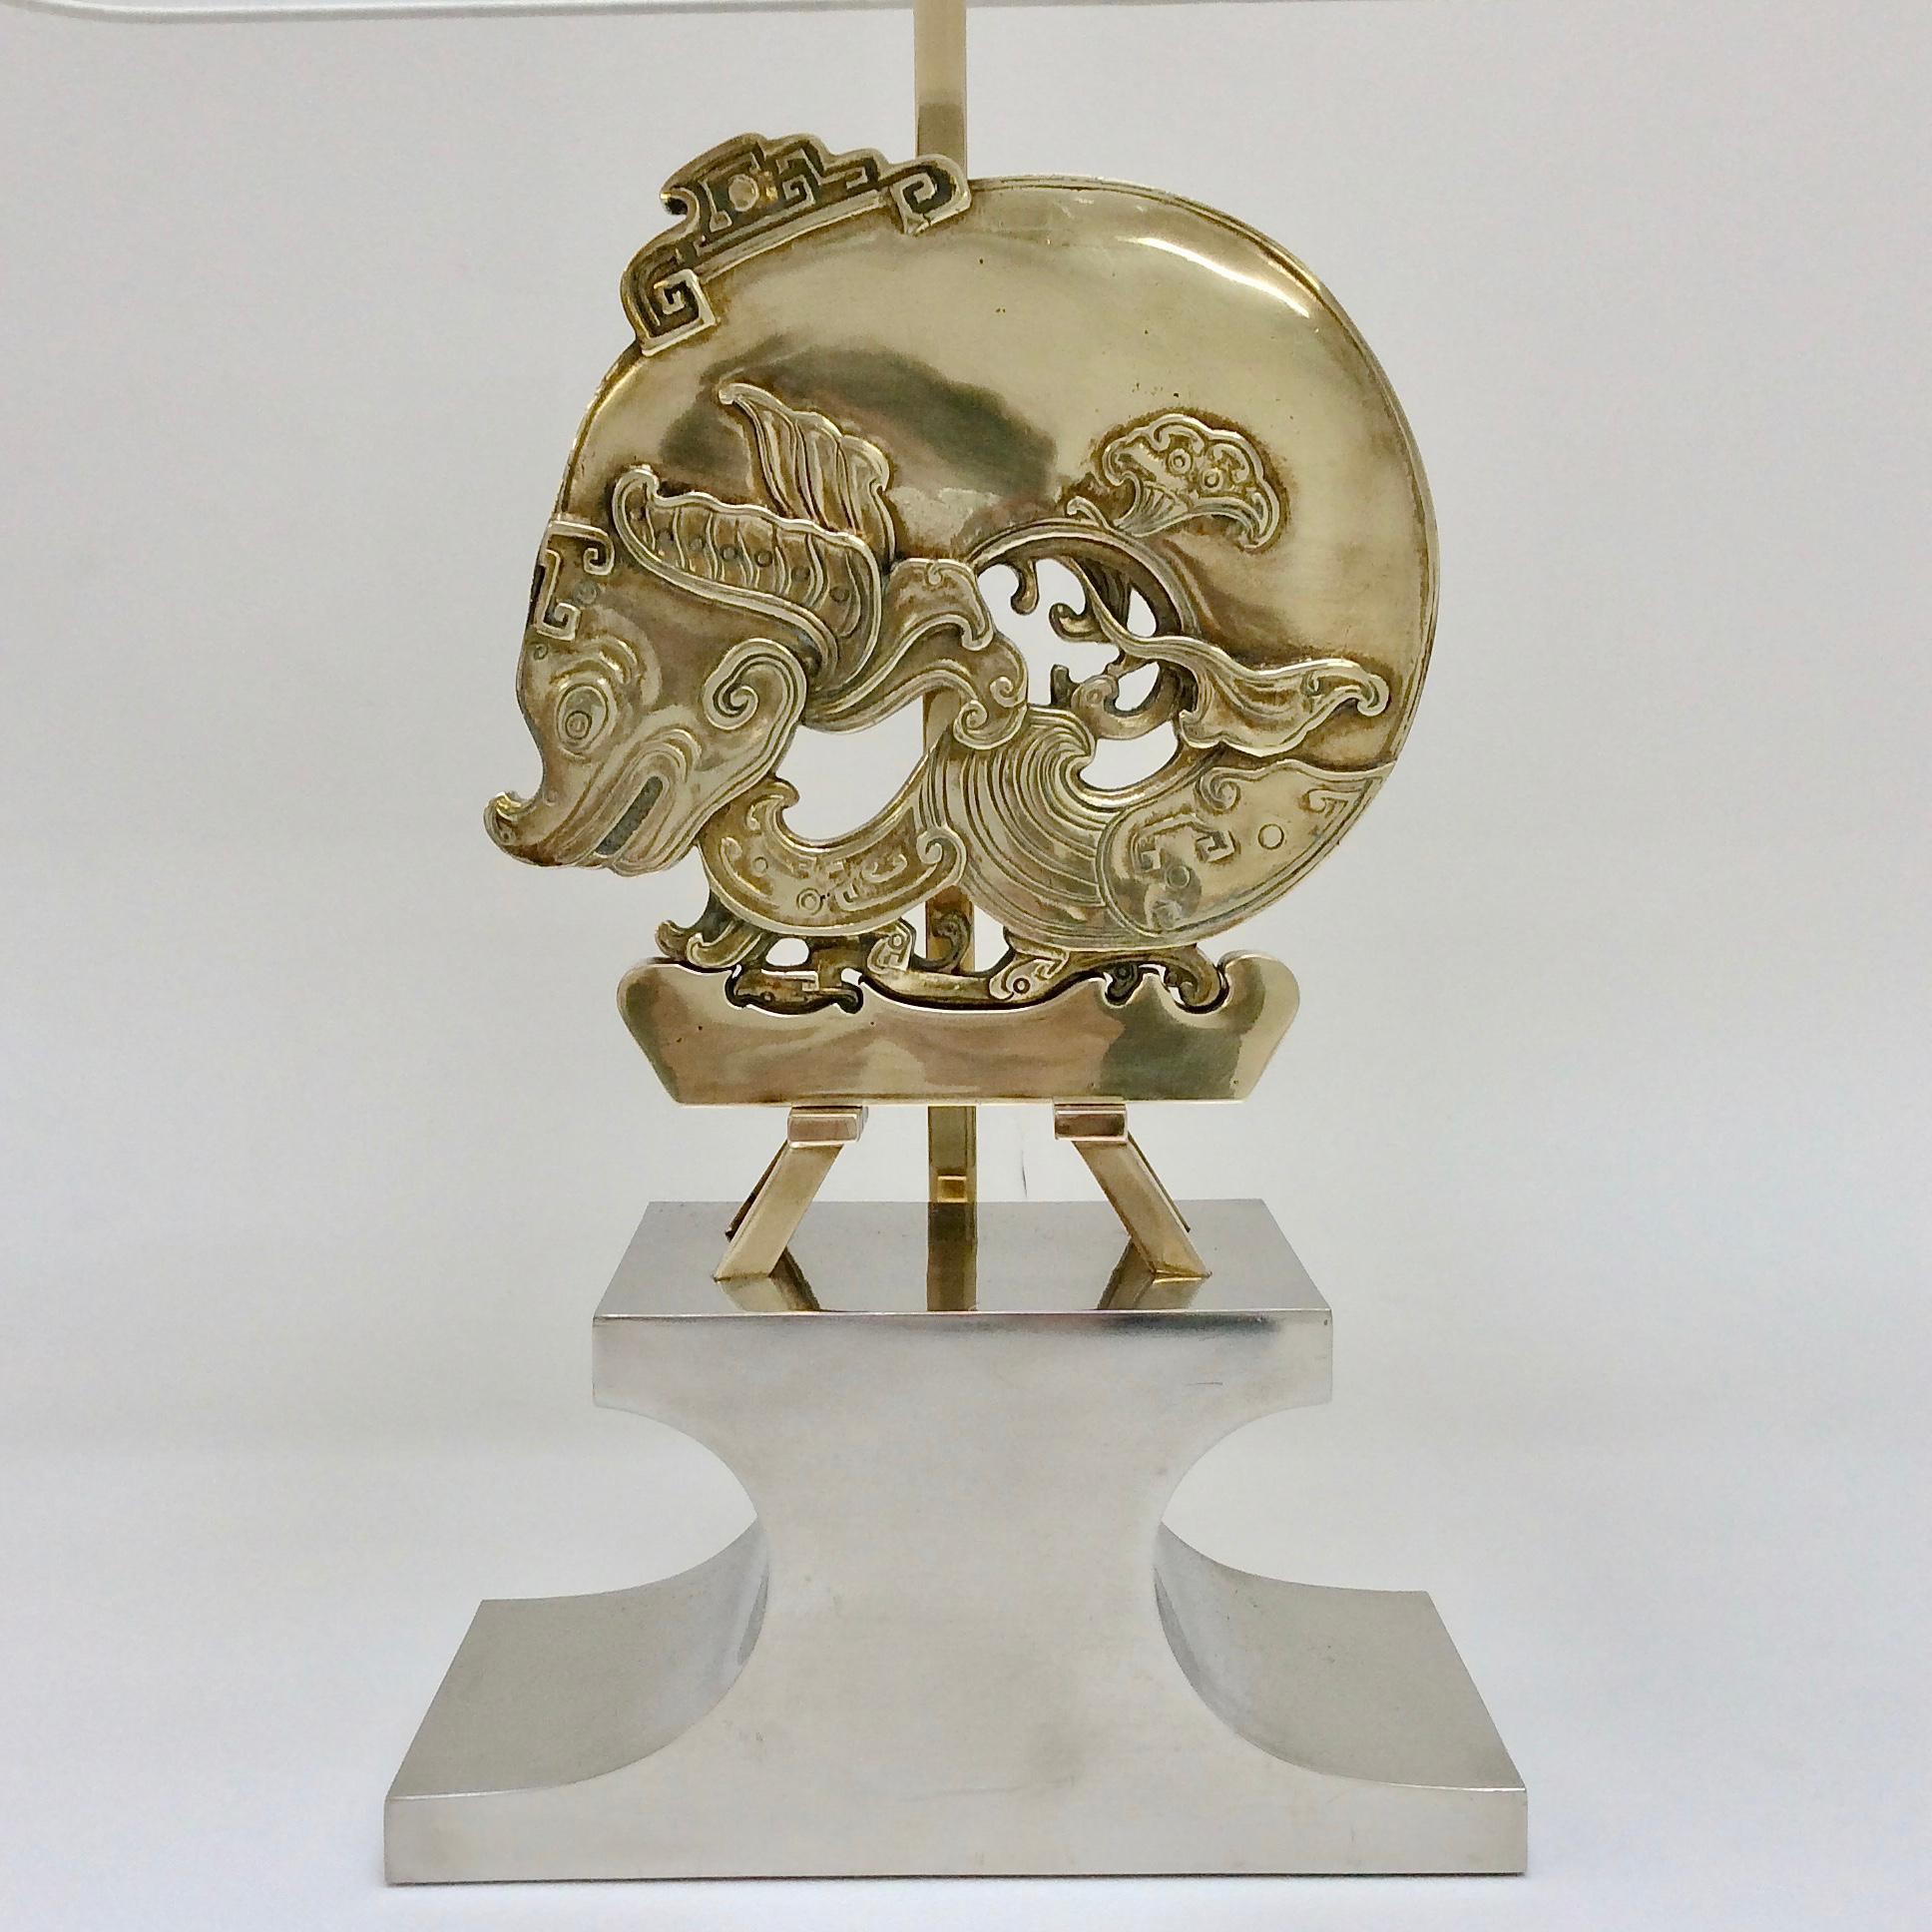 Rare Maria Pergay Dragon model table lamp, circa 1974, France.
Gold bronze and stainless steel.
New ivory fabric shade.
Two E27 bulbs of 60 W.
Dimensions: 84 cm H, 49 cm W, 25 cm D.
All purchases are covered by our Buyer Protection